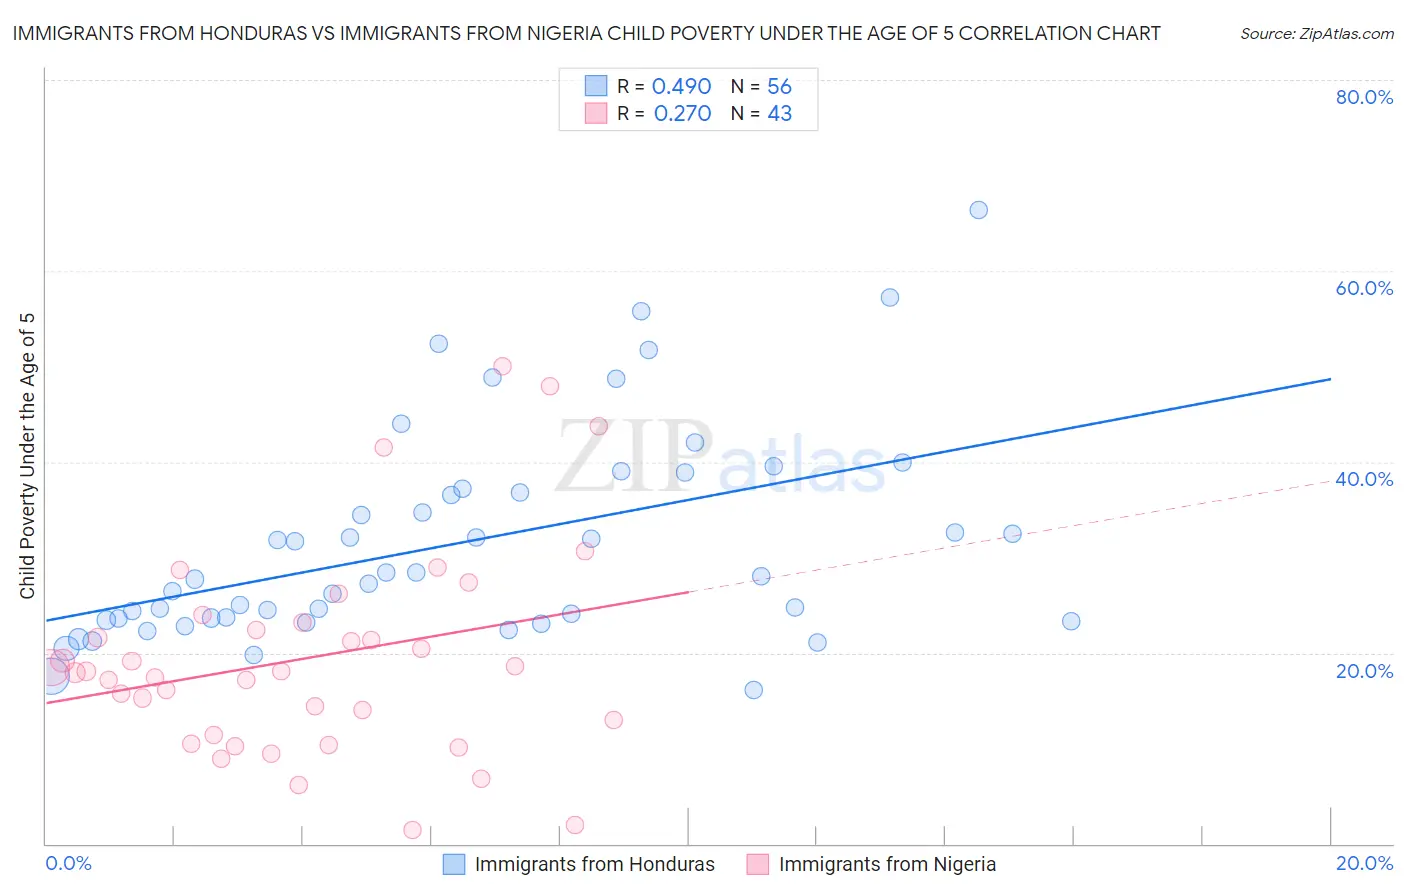 Immigrants from Honduras vs Immigrants from Nigeria Child Poverty Under the Age of 5